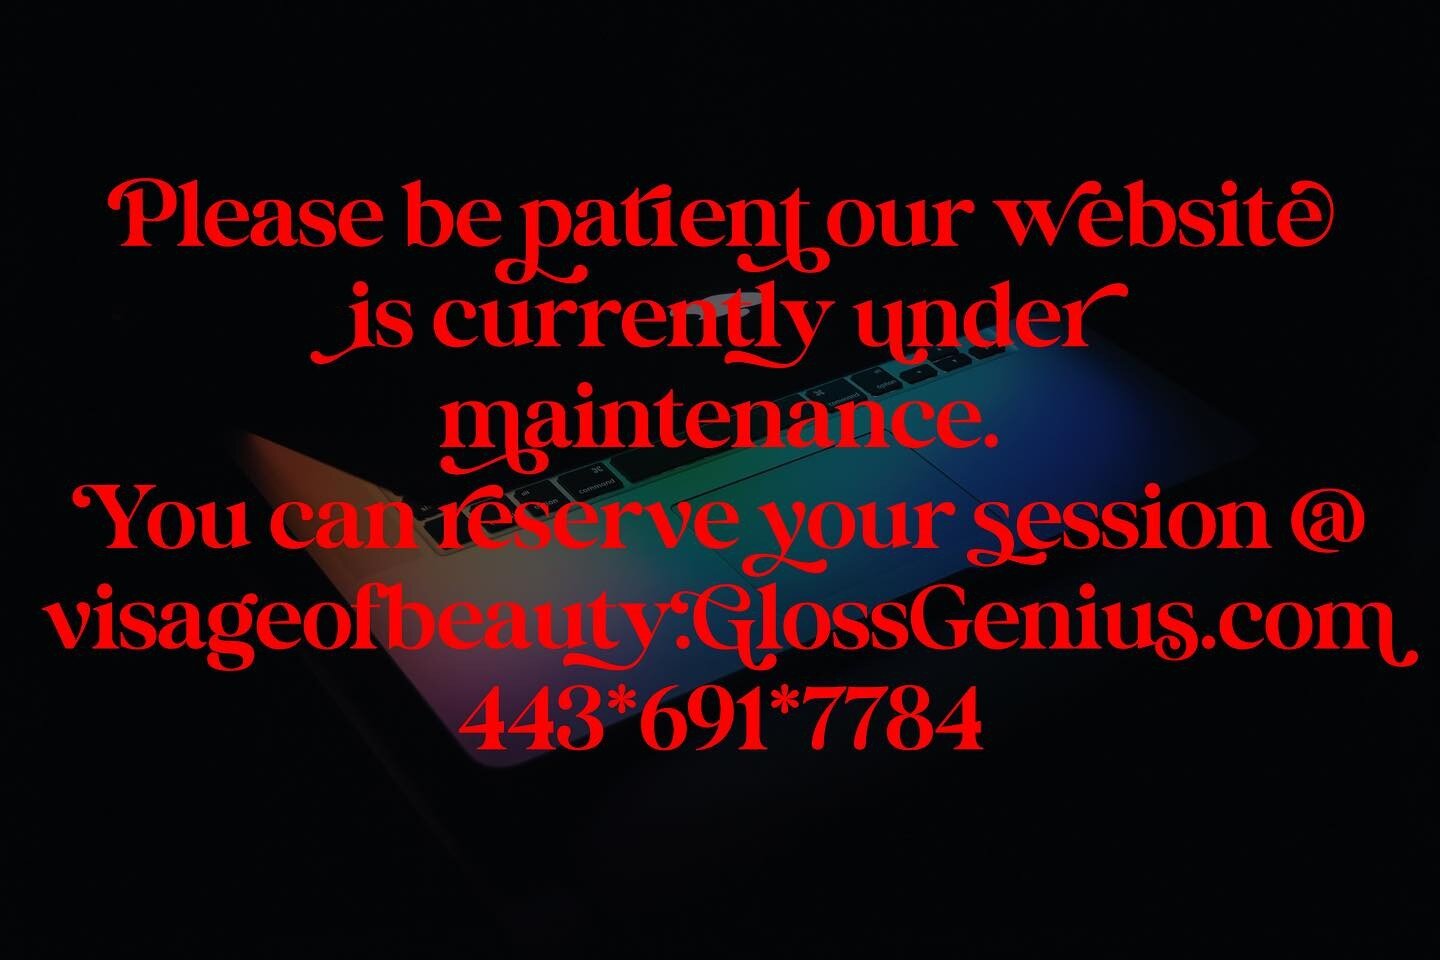 Please be patient our website is currently under maintenance. You can reserve your session @ www.visageofbeauty.glossgenius.com  or call/text 443*691*7784
  #visagebeauties #visagesteamandblow #visageblowout #owingsmillsstylist #foundryrow #colorist 